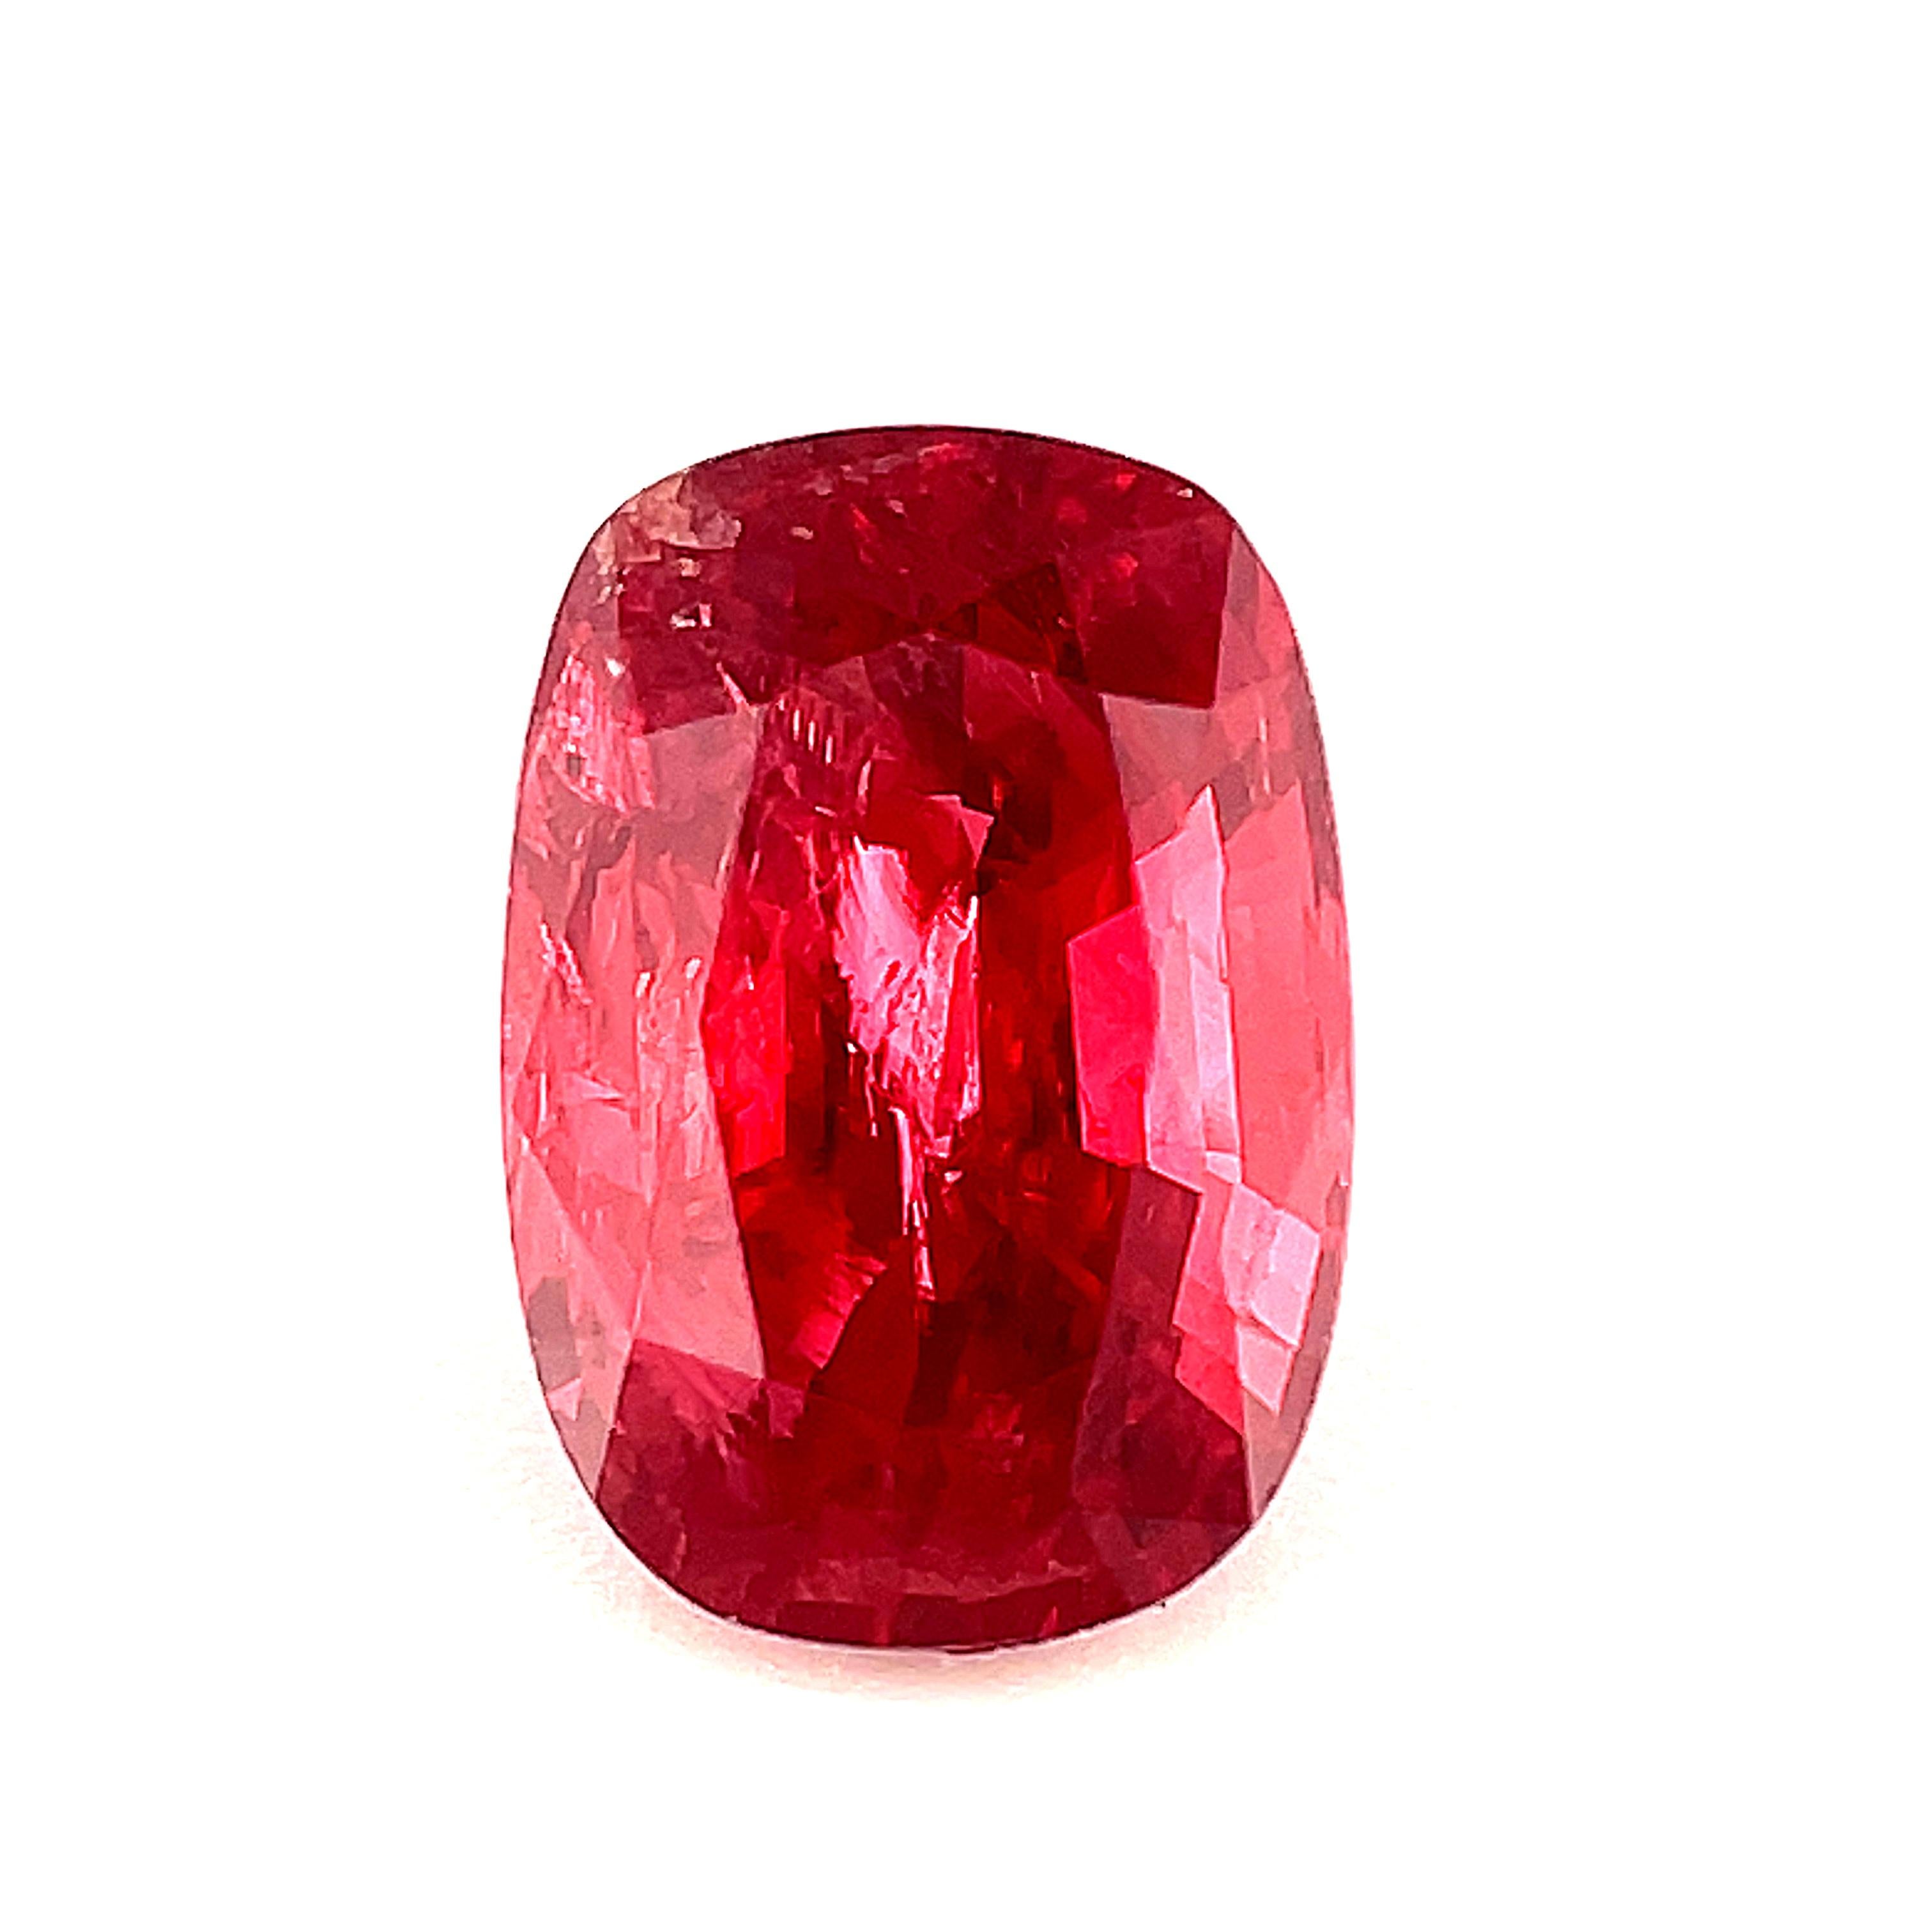 Women's or Men's 1.48 Carat Cushion Shaped Loose Unset Unmounted Red Spinel Gemstone For Sale